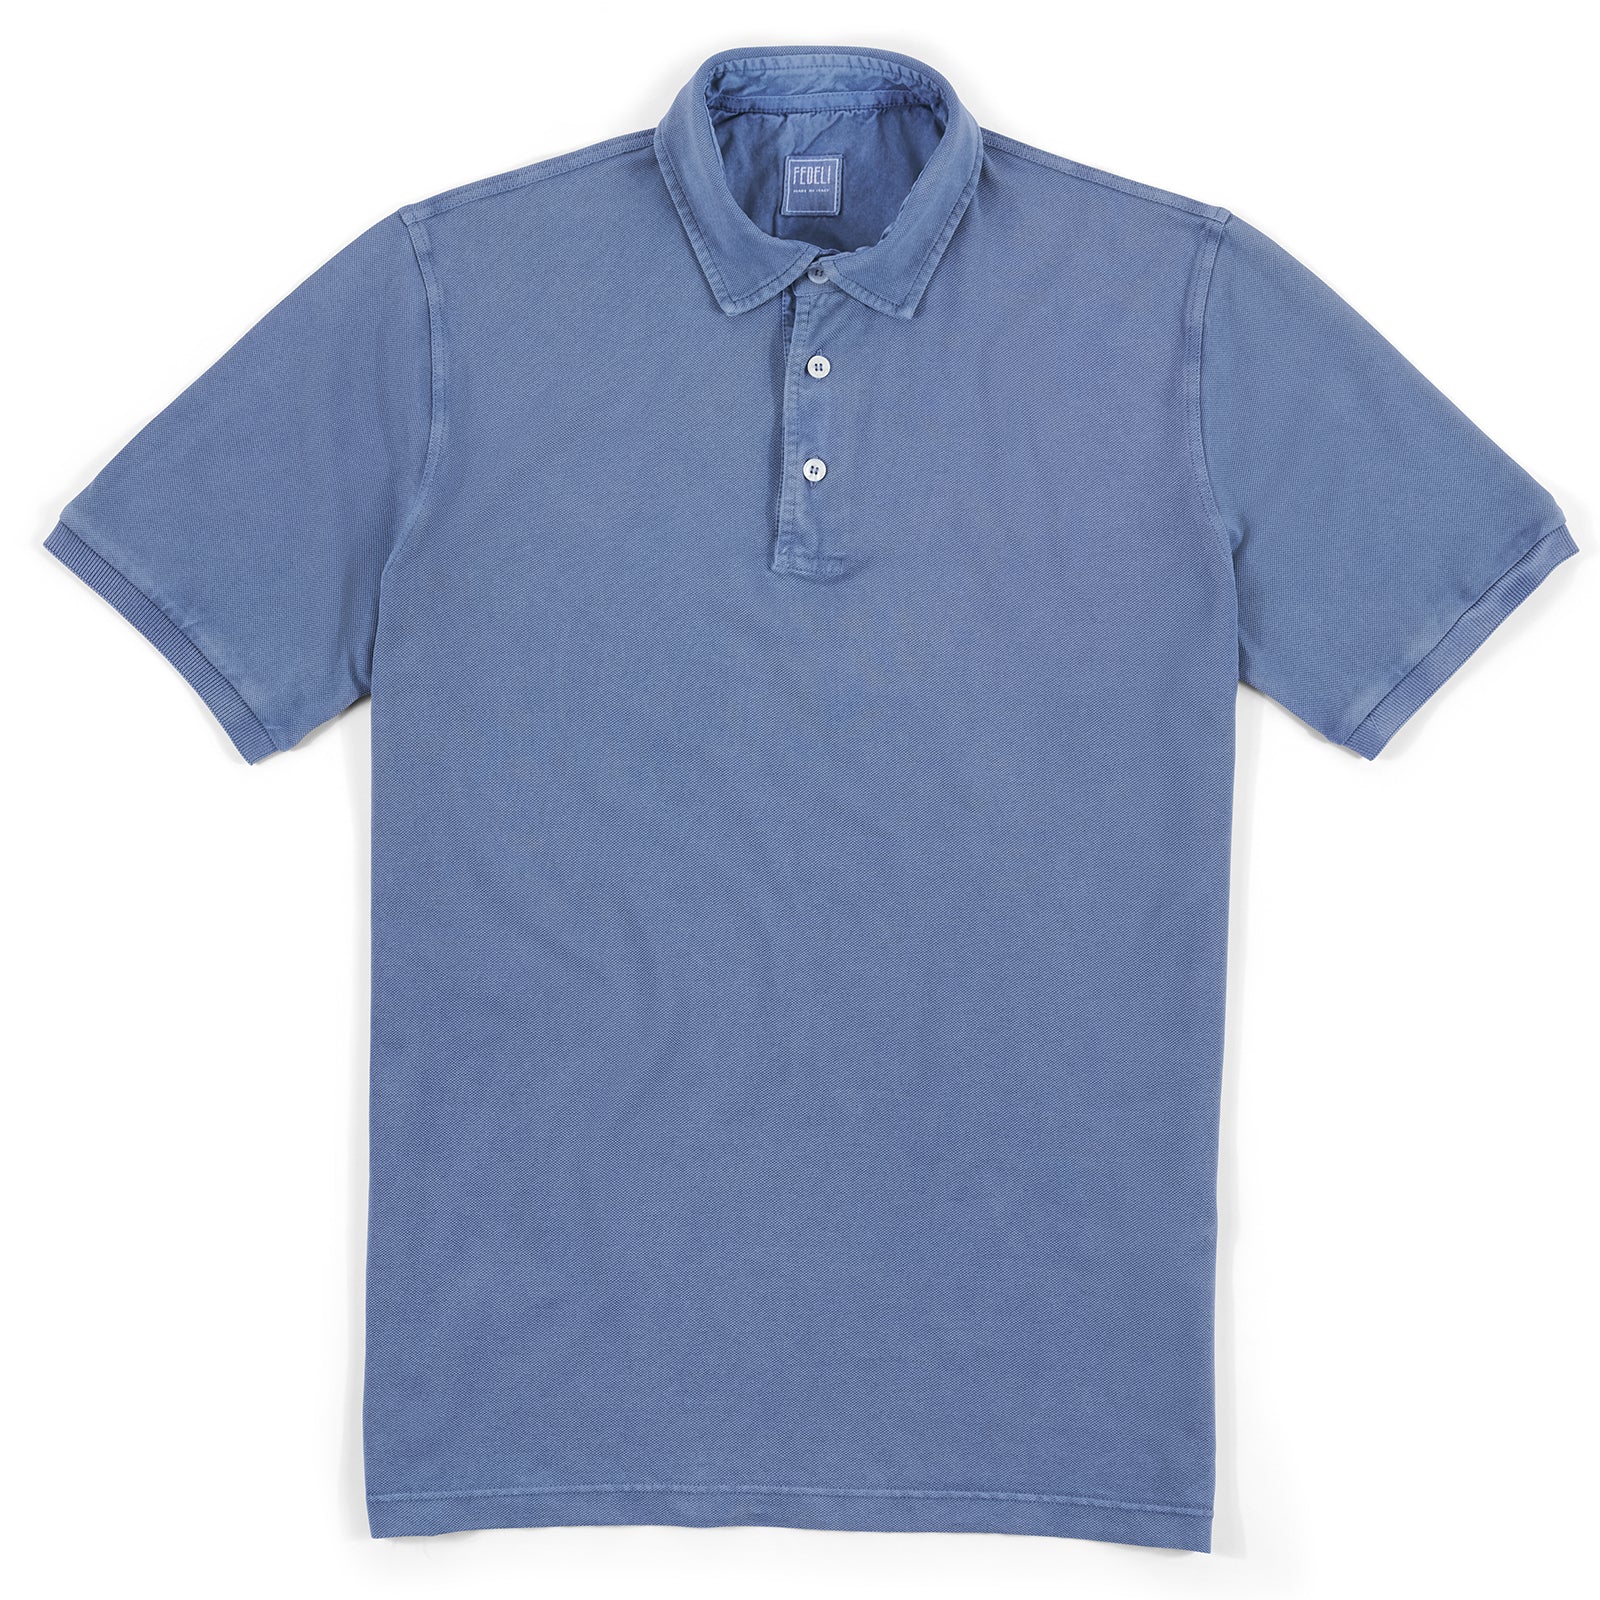 Fedeli Classic Short Sleeve Knitted Piqué Polo Shirt in Steel Blue